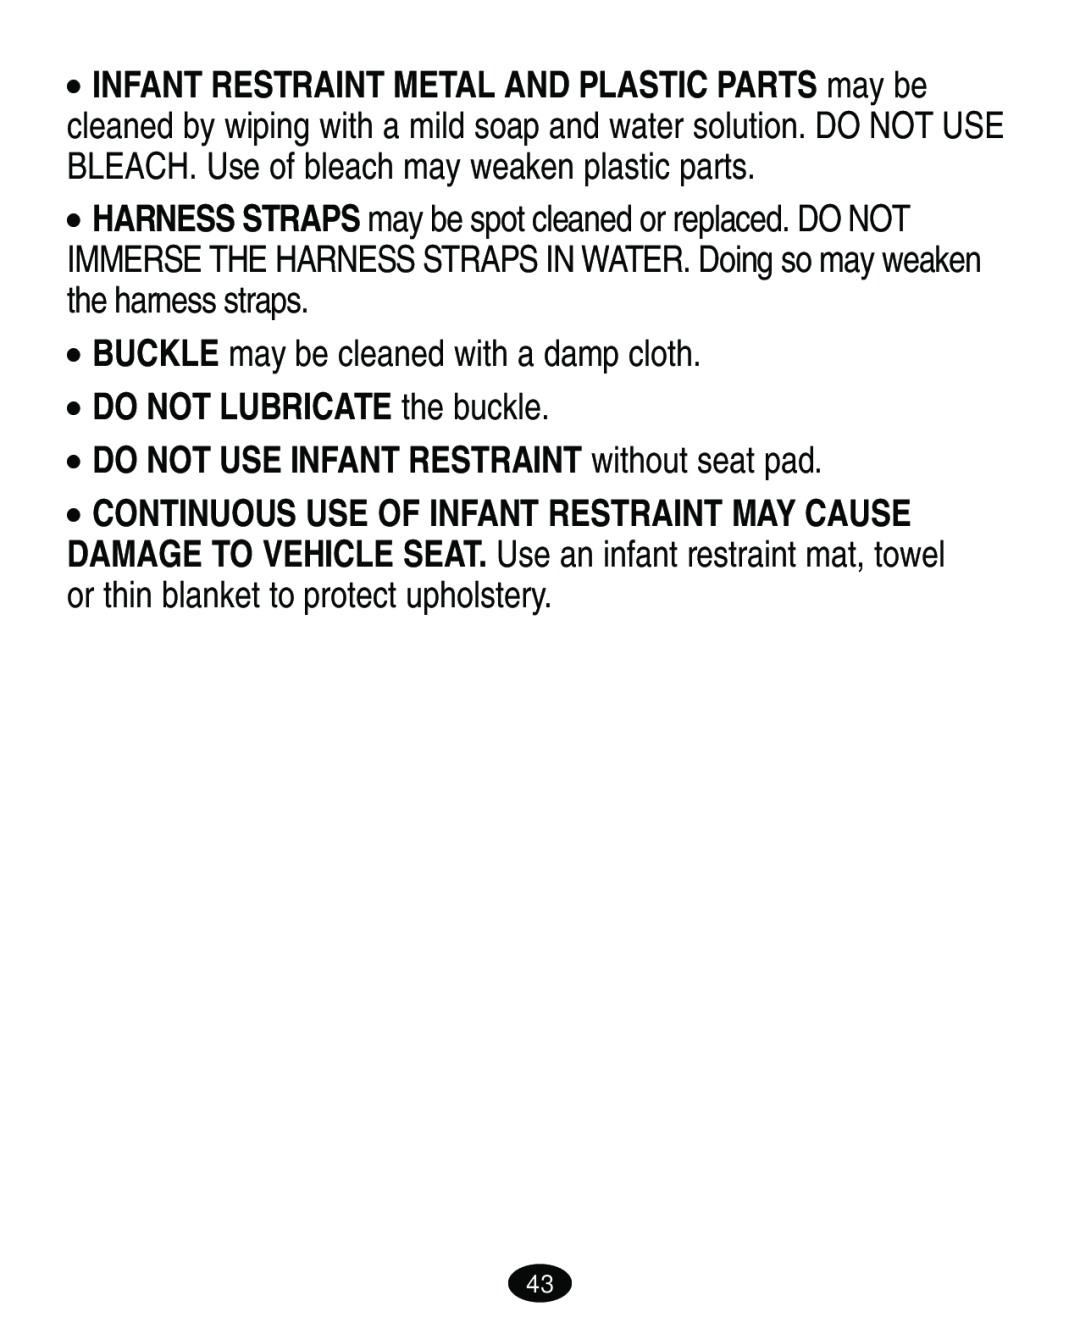 Graco ISPA108AB manual BUCKLE may be cleaned with a damp cloth, DO NOT LUBRICATE the buckle 